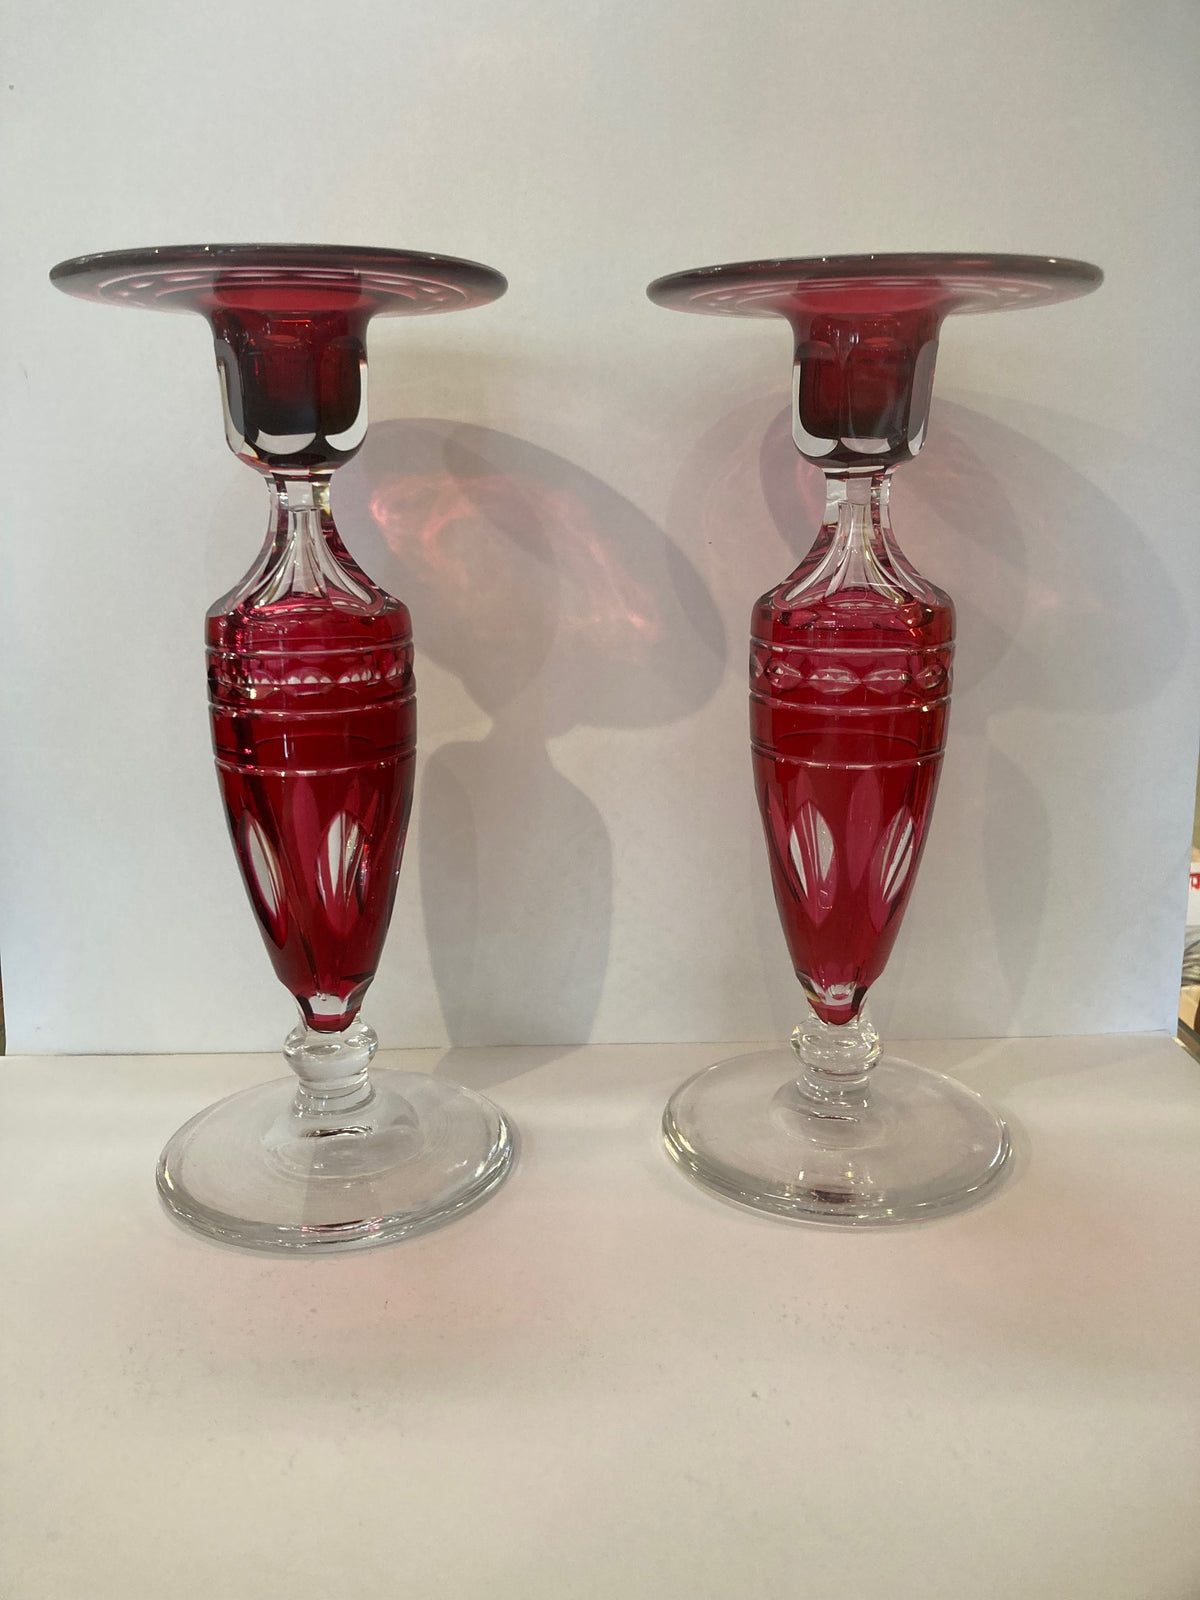 Rasberry Cut to Clear Center Bowl & Candlesticks